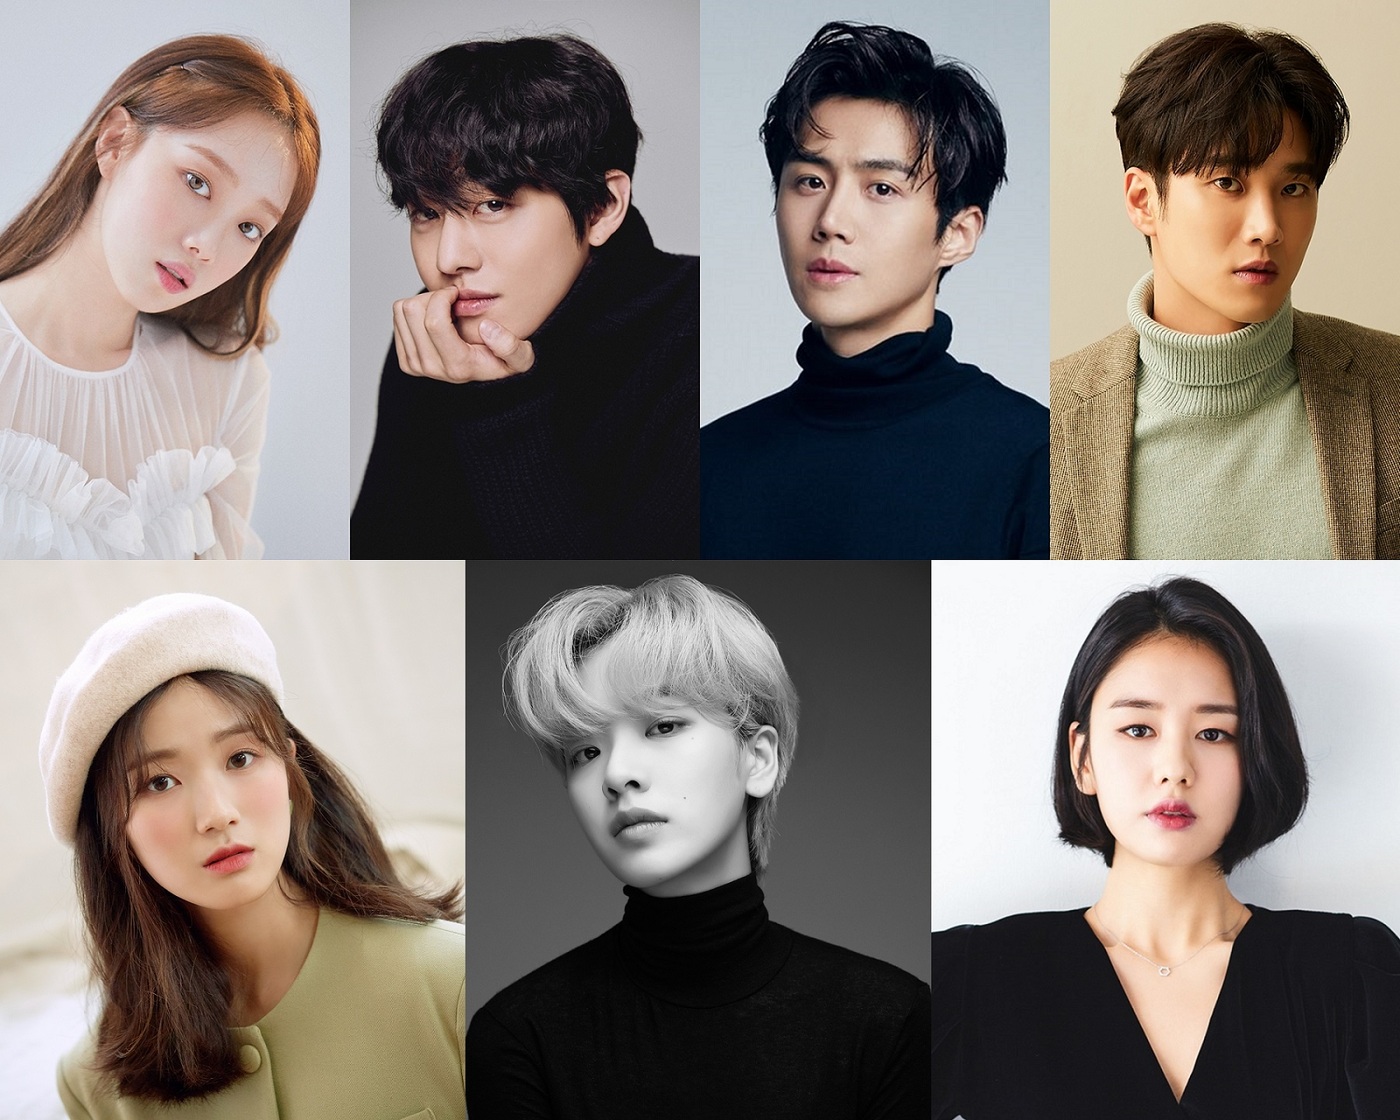 Seoul = = South Korean youth actors Lee Sung-kyung, Ahn Hyo-seop, Kim Seon-ho, Ahn Bo-hyun, Kim Hye-yoon, Lee Ju-young and Ahn Eun-jin will attend the 2020 Asia Artist Awards (2020 Asia The Artist Awards et al., 2020 AAA).The 2020 AAA will be held on November 25th, and will be hosted by Star News and co-hosted by Motive Productions, Dorothy Communications and AAA Organizing Committee.As the news of the popular vote opening to select Passion Stone and Passion Stone Celeb, which shined in 2020, has been announced, seven Actor, which is raising the best share price this year, is announcing the attendance and the enthusiasm for the awards ceremony is getting hot.Lee Sung-kyung and Ahn Hyo-seop, who showed stable acting and past chemistry through SBS Romantic Doctor Kim Sabu 2, will find 2020 AAA together.Drama fans are expecting the news that the two people who stand as actors representing their 20s will reunite after the end.Kim Seon-ho is showing off his friendly charm with KBS 2TV 1 night and 2 days, and at the same time, he is expected to act as an all-round entertainer who is good at both Acting and Entertainment with TVN Start Up scheduled to be broadcast on the 17th.Ahn Bo-hyun will show off his charming villain Acting through JTBC Itaewon Clath and will visit the house theater with MBC Kairos scheduled to be broadcast on the 26th.Kim Hye-yoon, who showed luxury activities at JTBC SKY Castle and MBC How to Discover, and Lee Joo-young, who showed a wide range of activities through the drama Itaewon Clath movie Baseball Girl, will also attend 2020 AAA.In addition, Ahn Eun-jin, who is fascinating the house theater with JTBC The Number of Cases after taking a snow stamp on viewers with TVN Personal Life, will also add to the diversity by confirming 2020 AAA attendance.